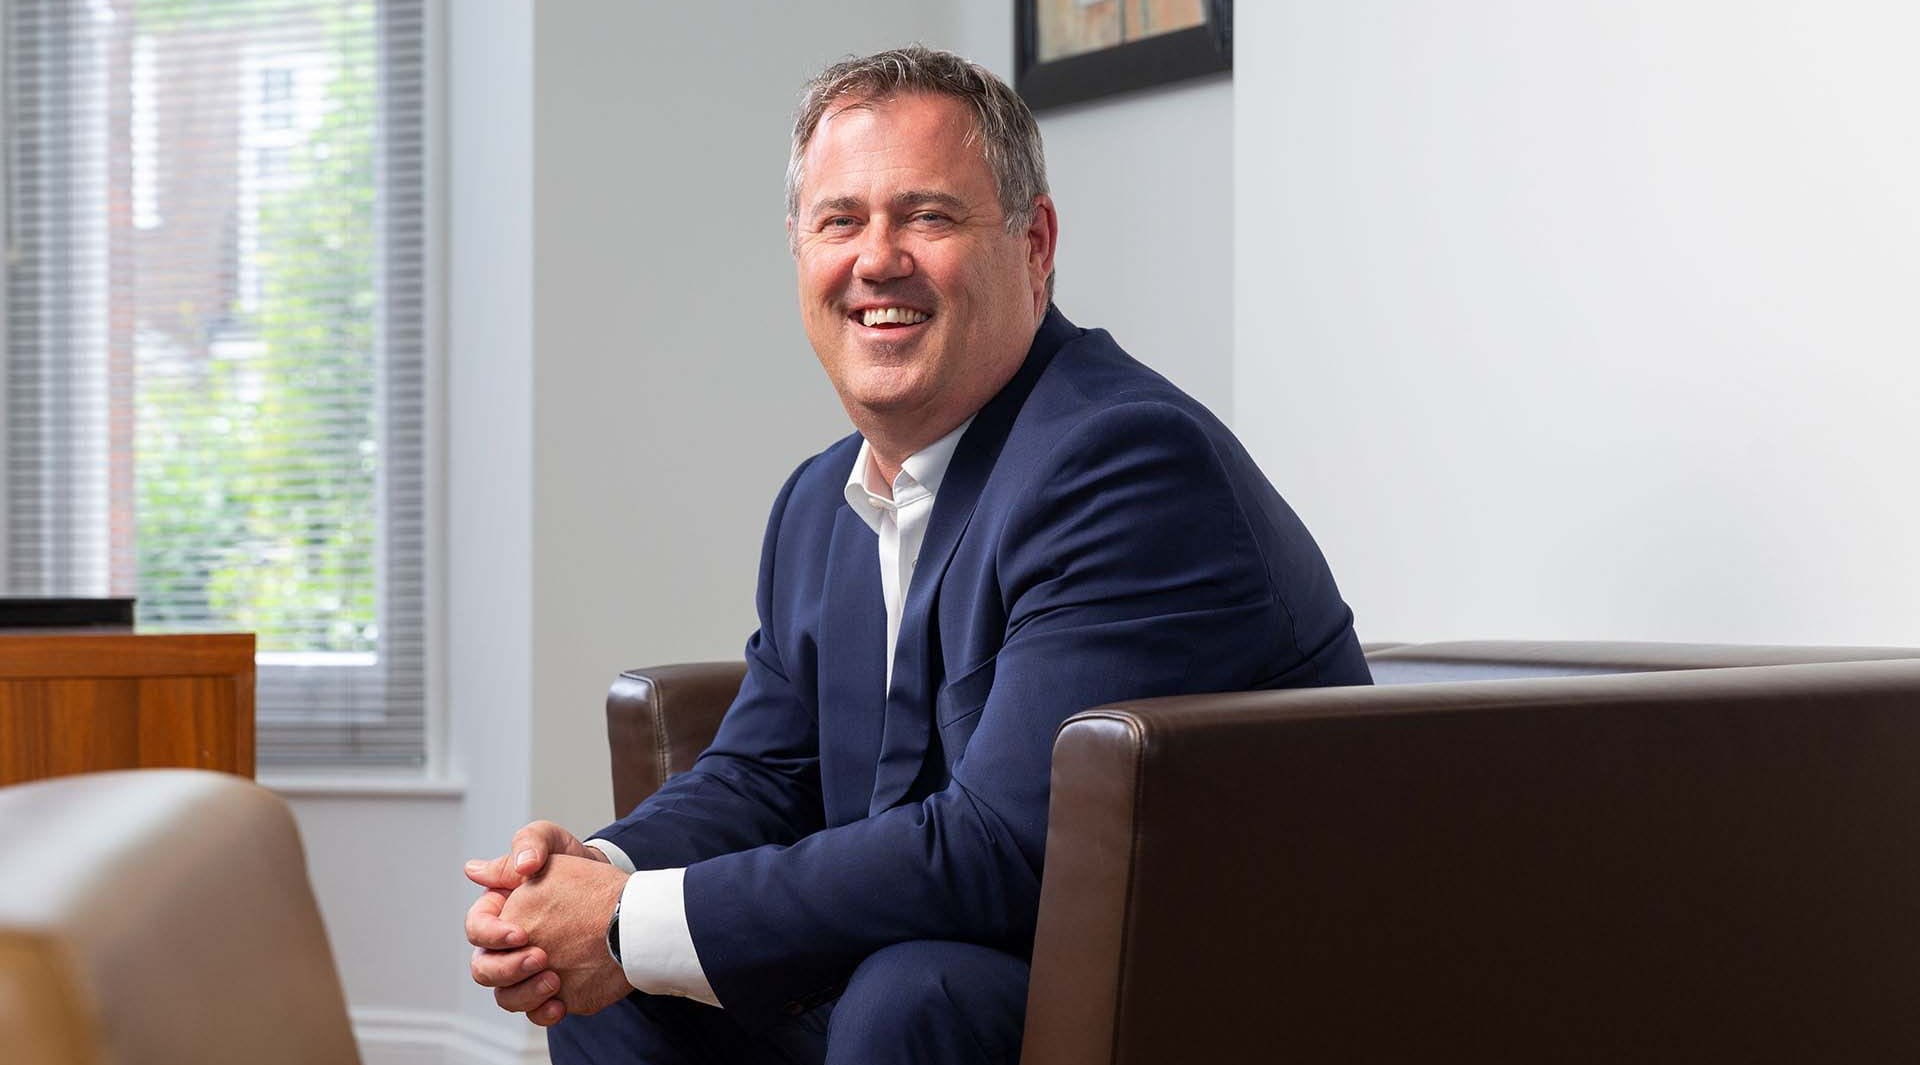 Michael Pay is a director and coowner of advisory firm EMC Corporate Finance, based in Brighton and Hove. He was voted Insider Media Dealmaker of the Year at the 2024 South East Awards